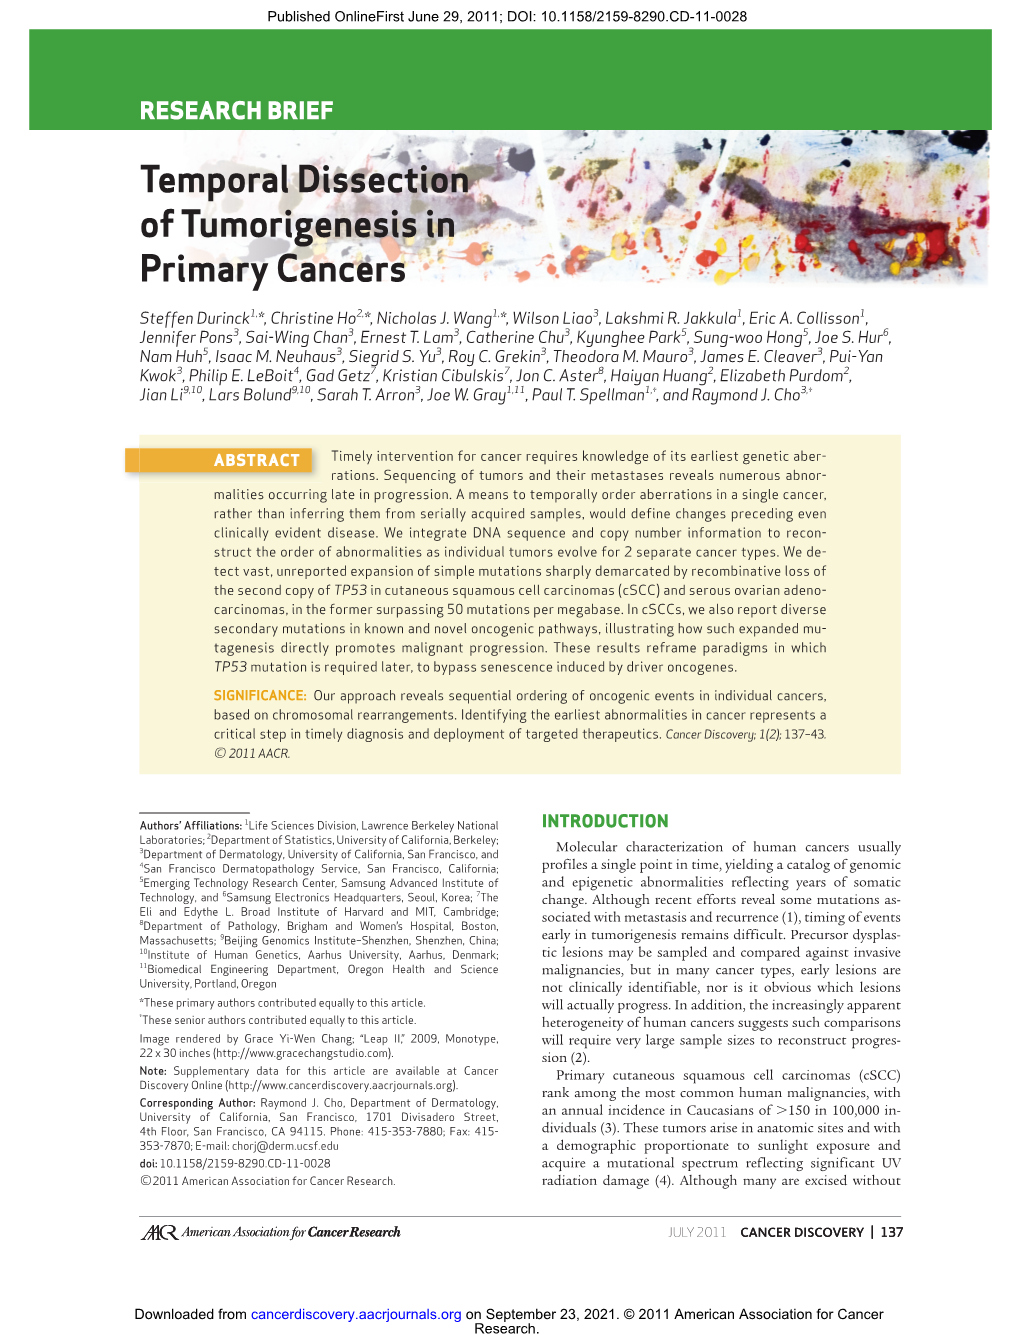 Temporal Dissection of Tumorigenesis in Primary Cancers Research Brief RESEARCH BRIEF